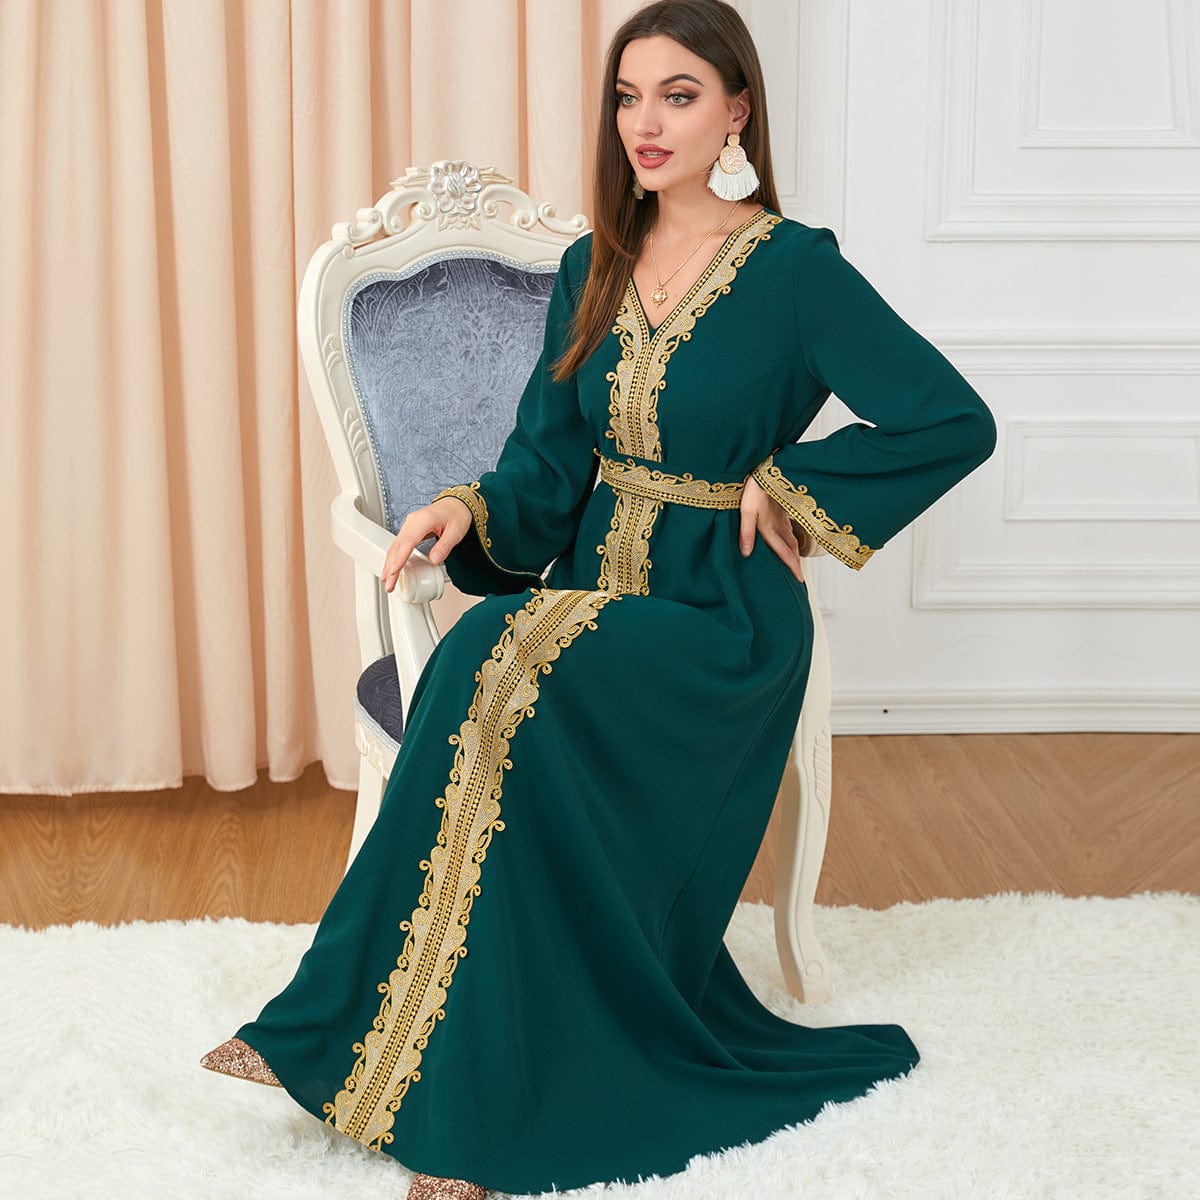 a woman wearing a Green solid color embroidery long-sleeved dress and sitting on armed chair